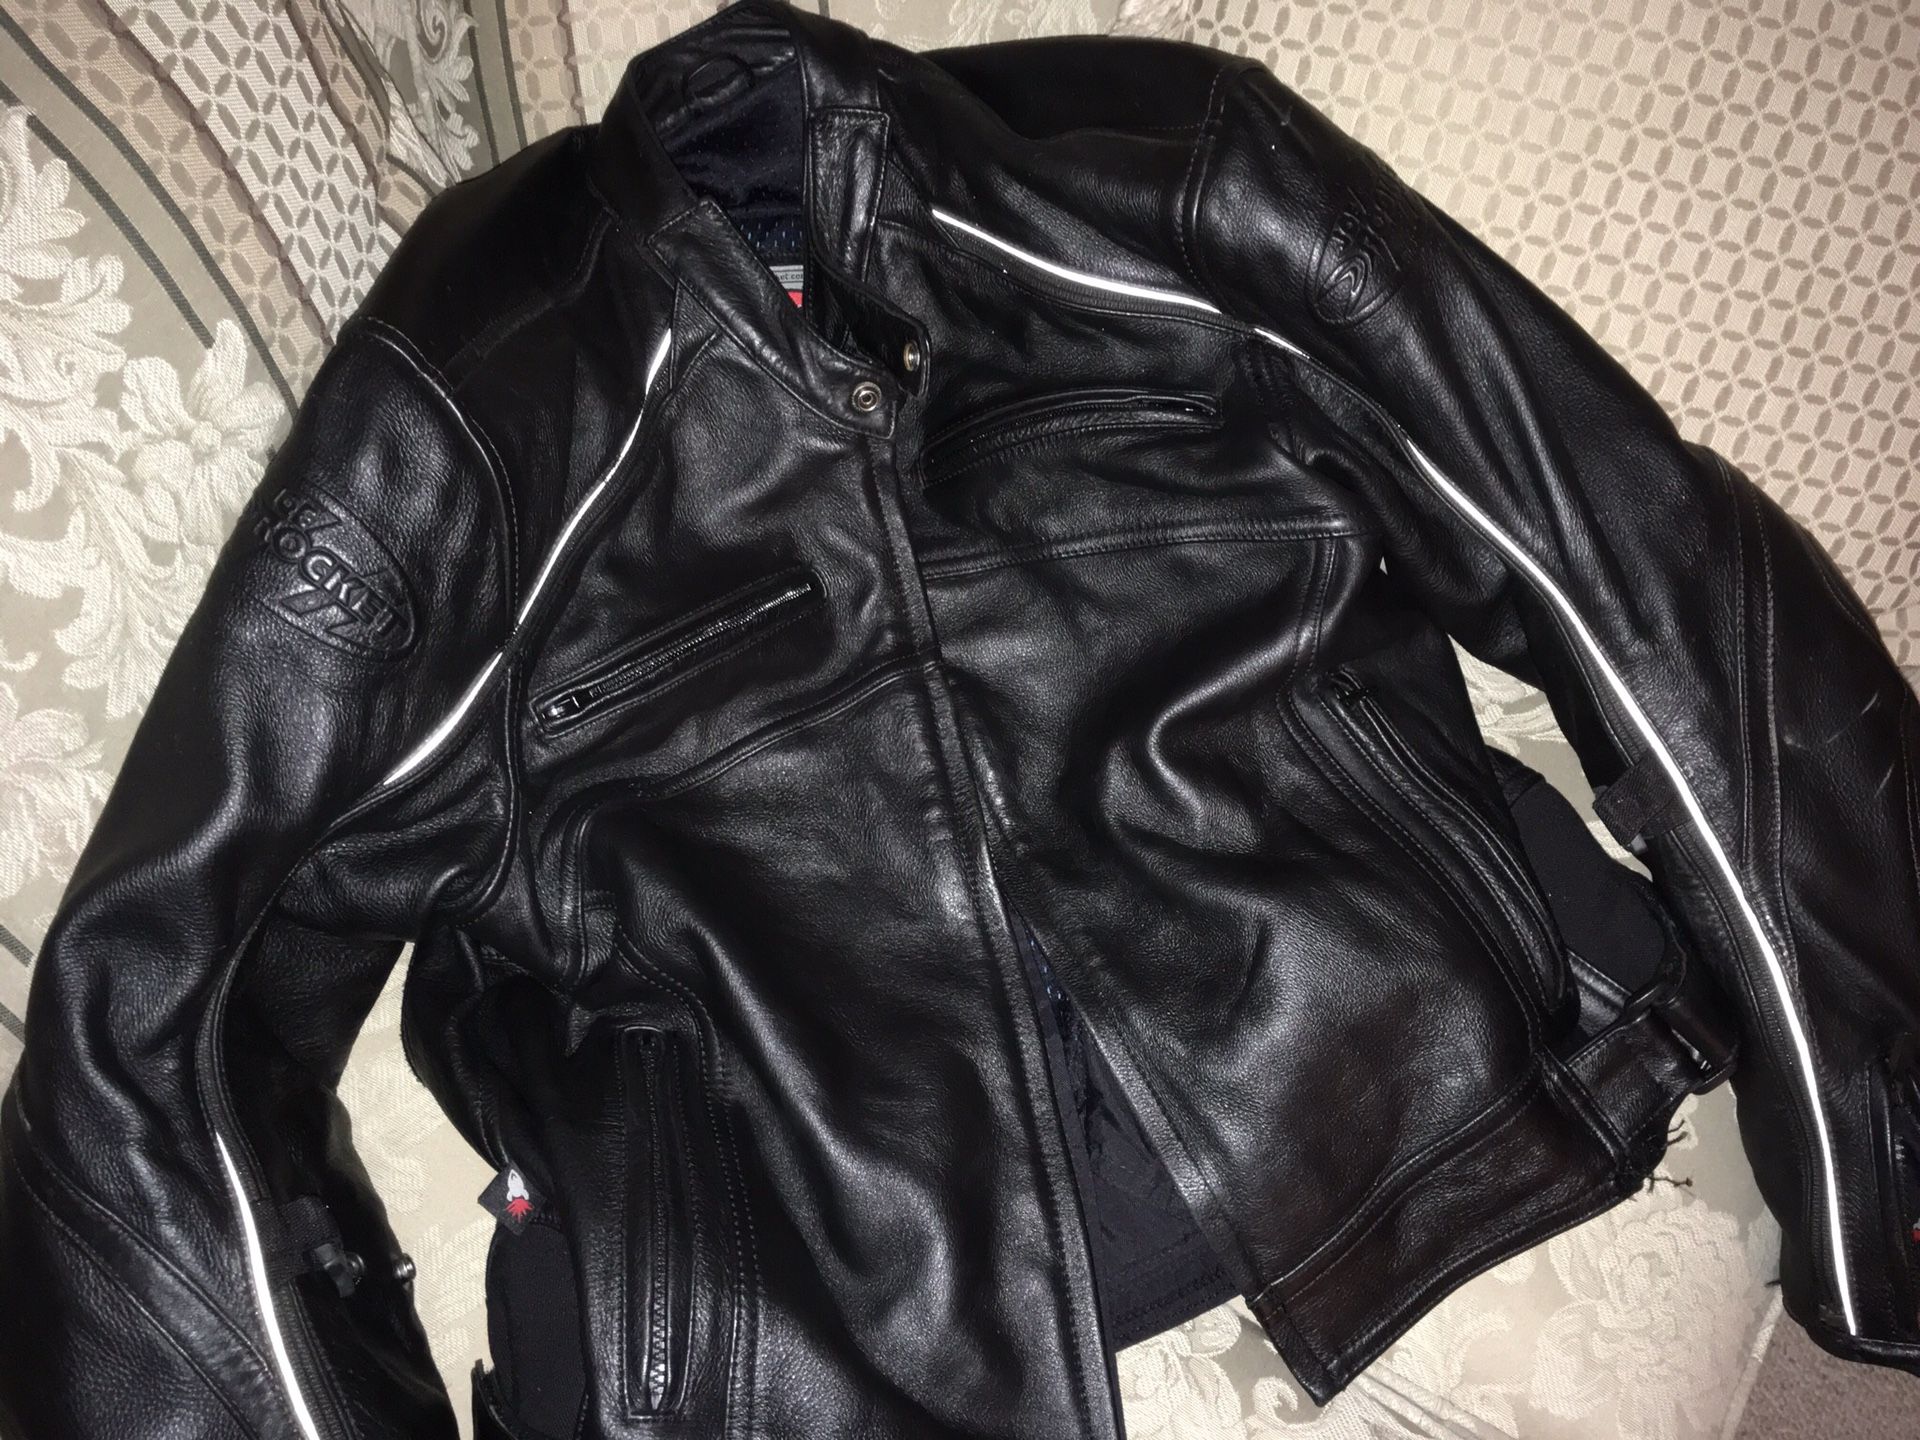 Leather armored motorcycle jacket, Joe Rockets (worn once)